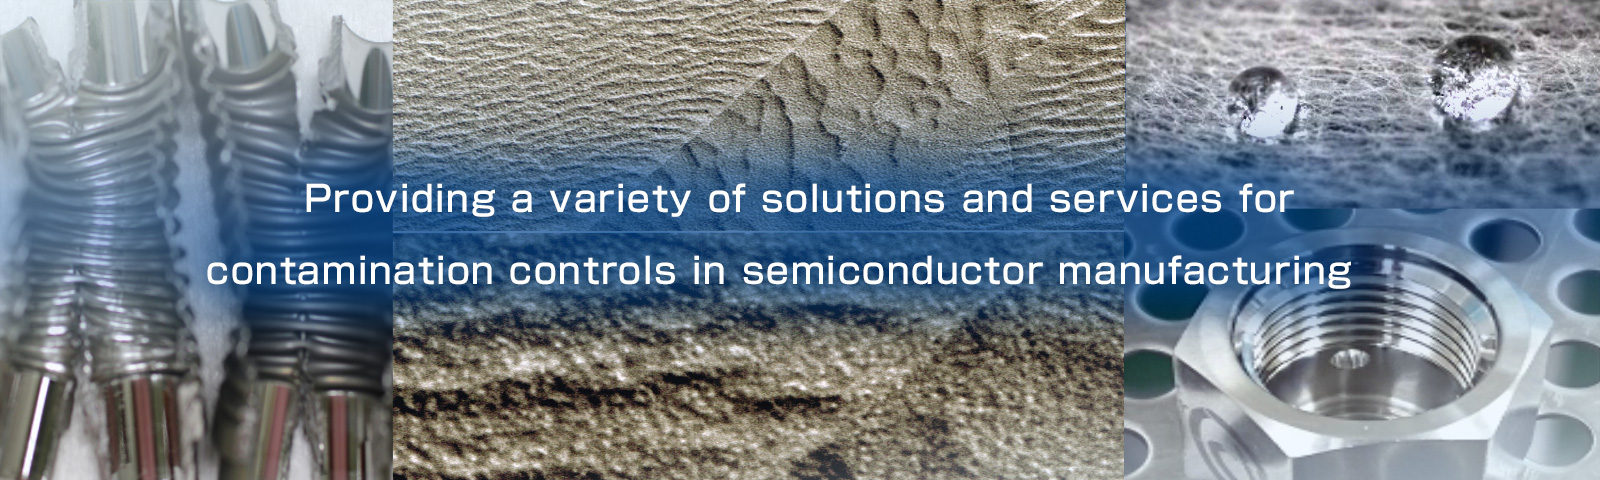 Providing a variety of solutions and services for contamination controls in semiconductor manufacturing